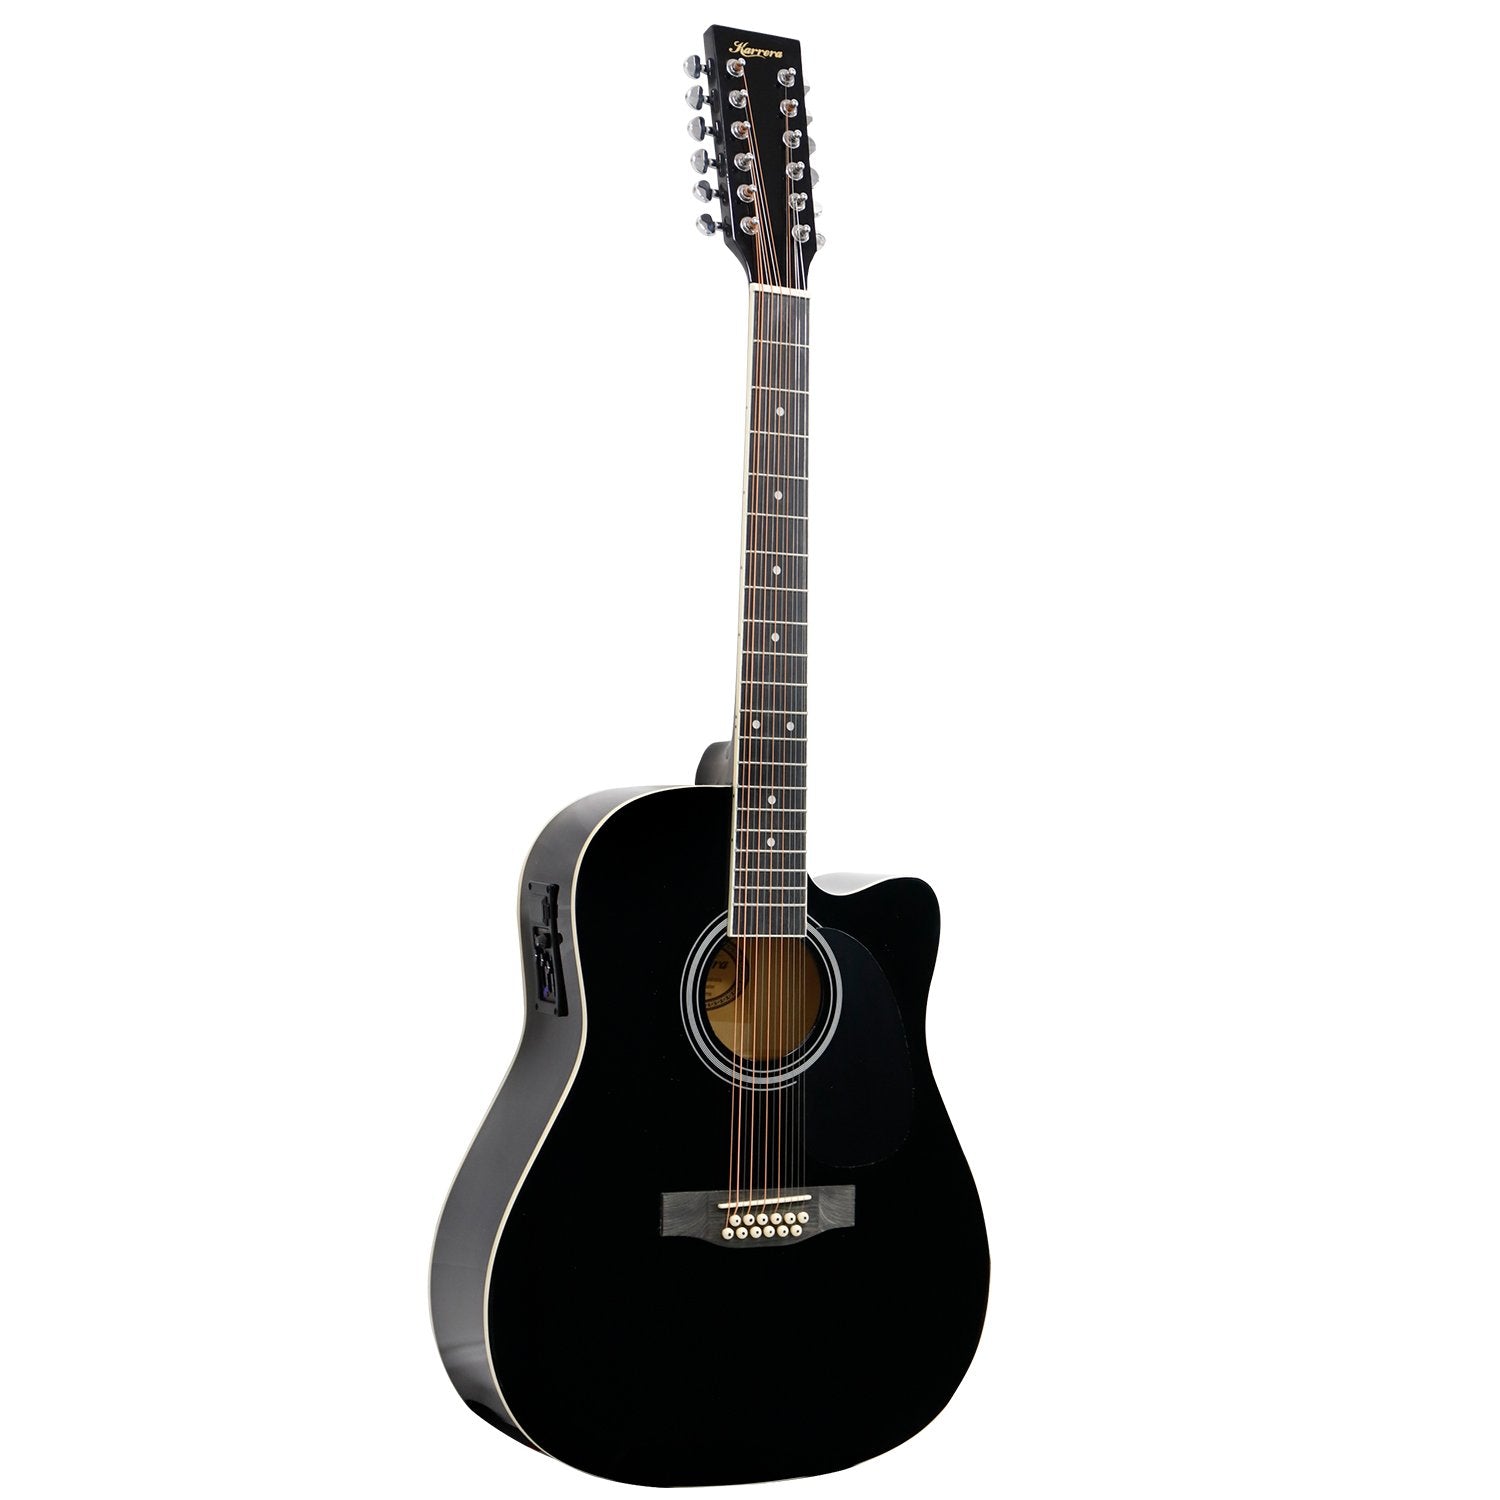 12-String High-Gloss Acoustic Guitar with EQ & Kit